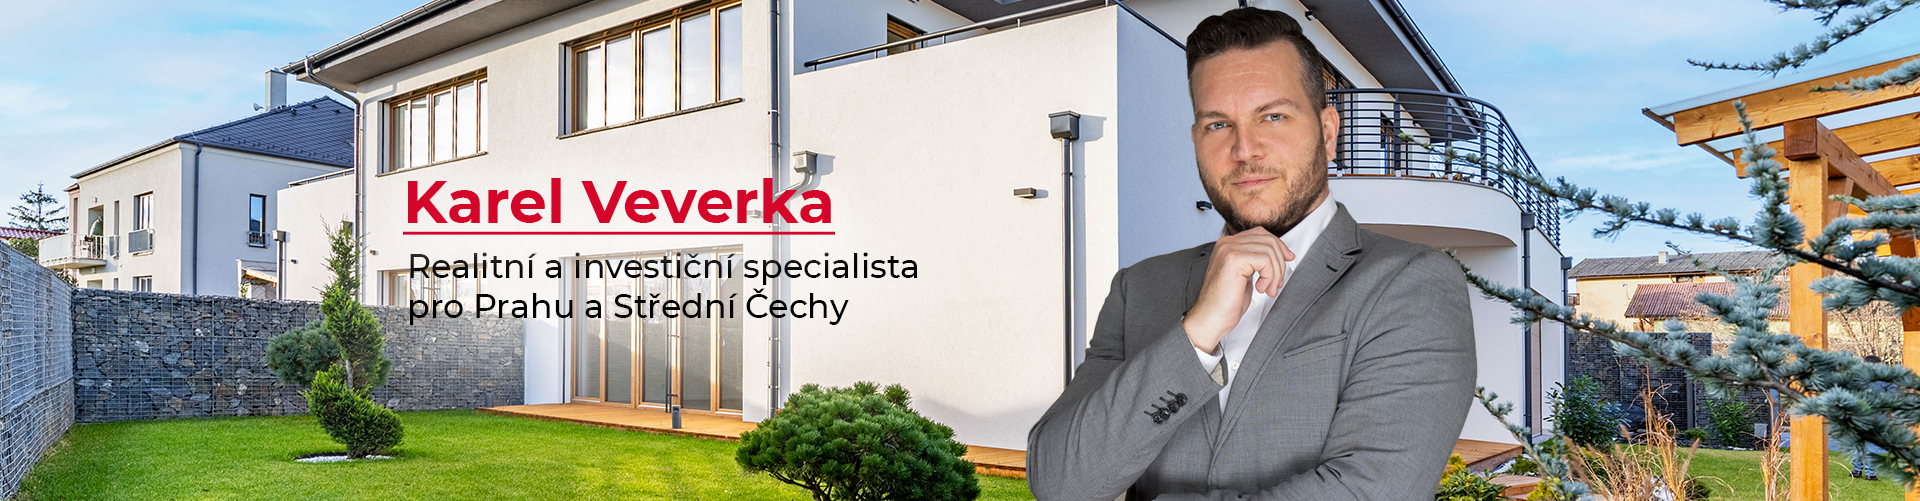 Karel Veverka, real estate agent and investment specialist Prague, Central Bohemia - Matrix Reality a.s. - 1